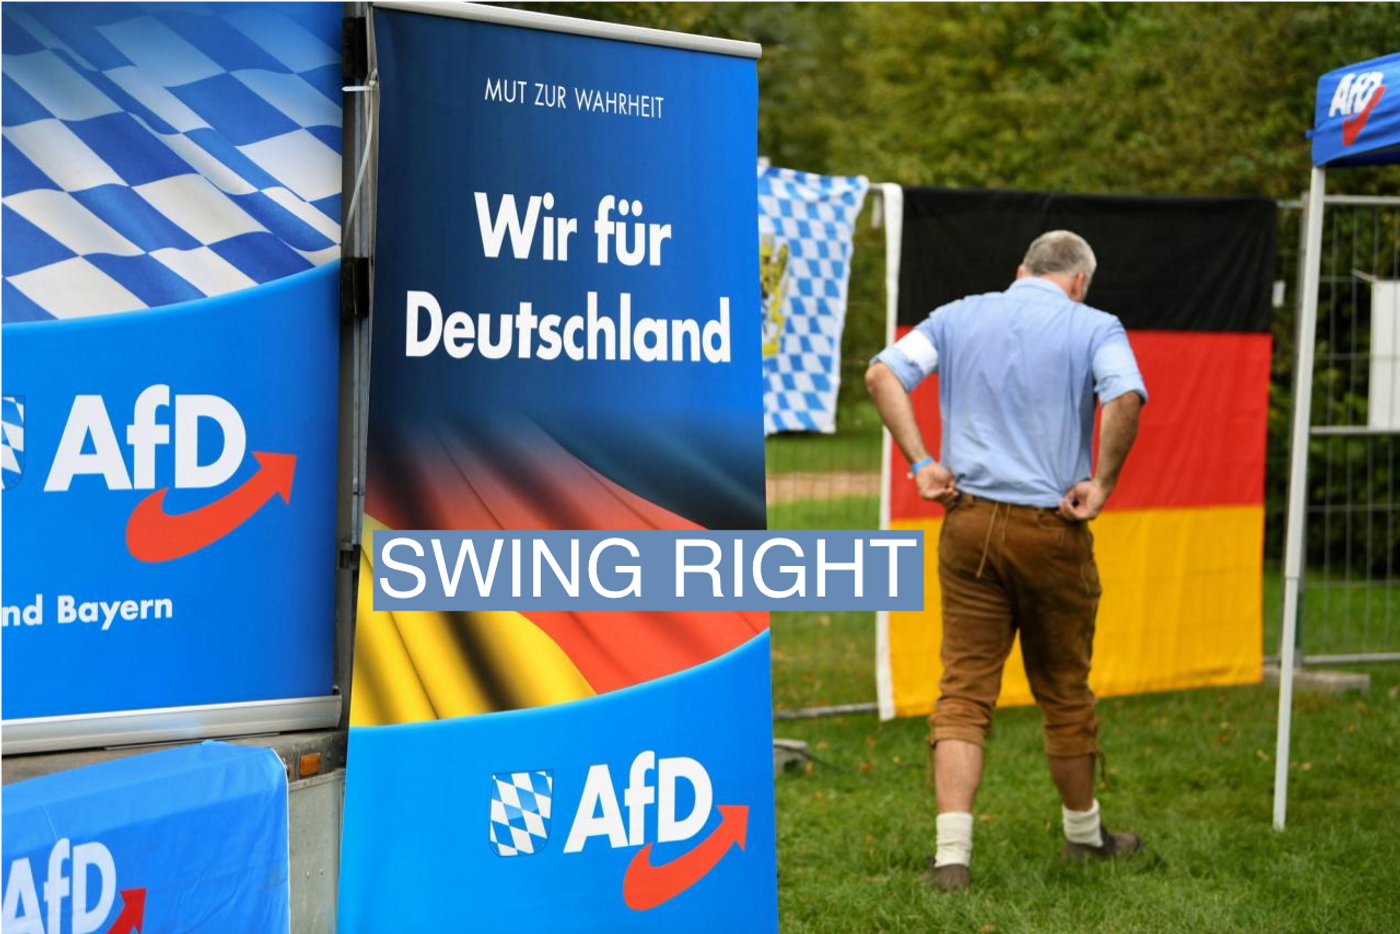 AfD in Germany